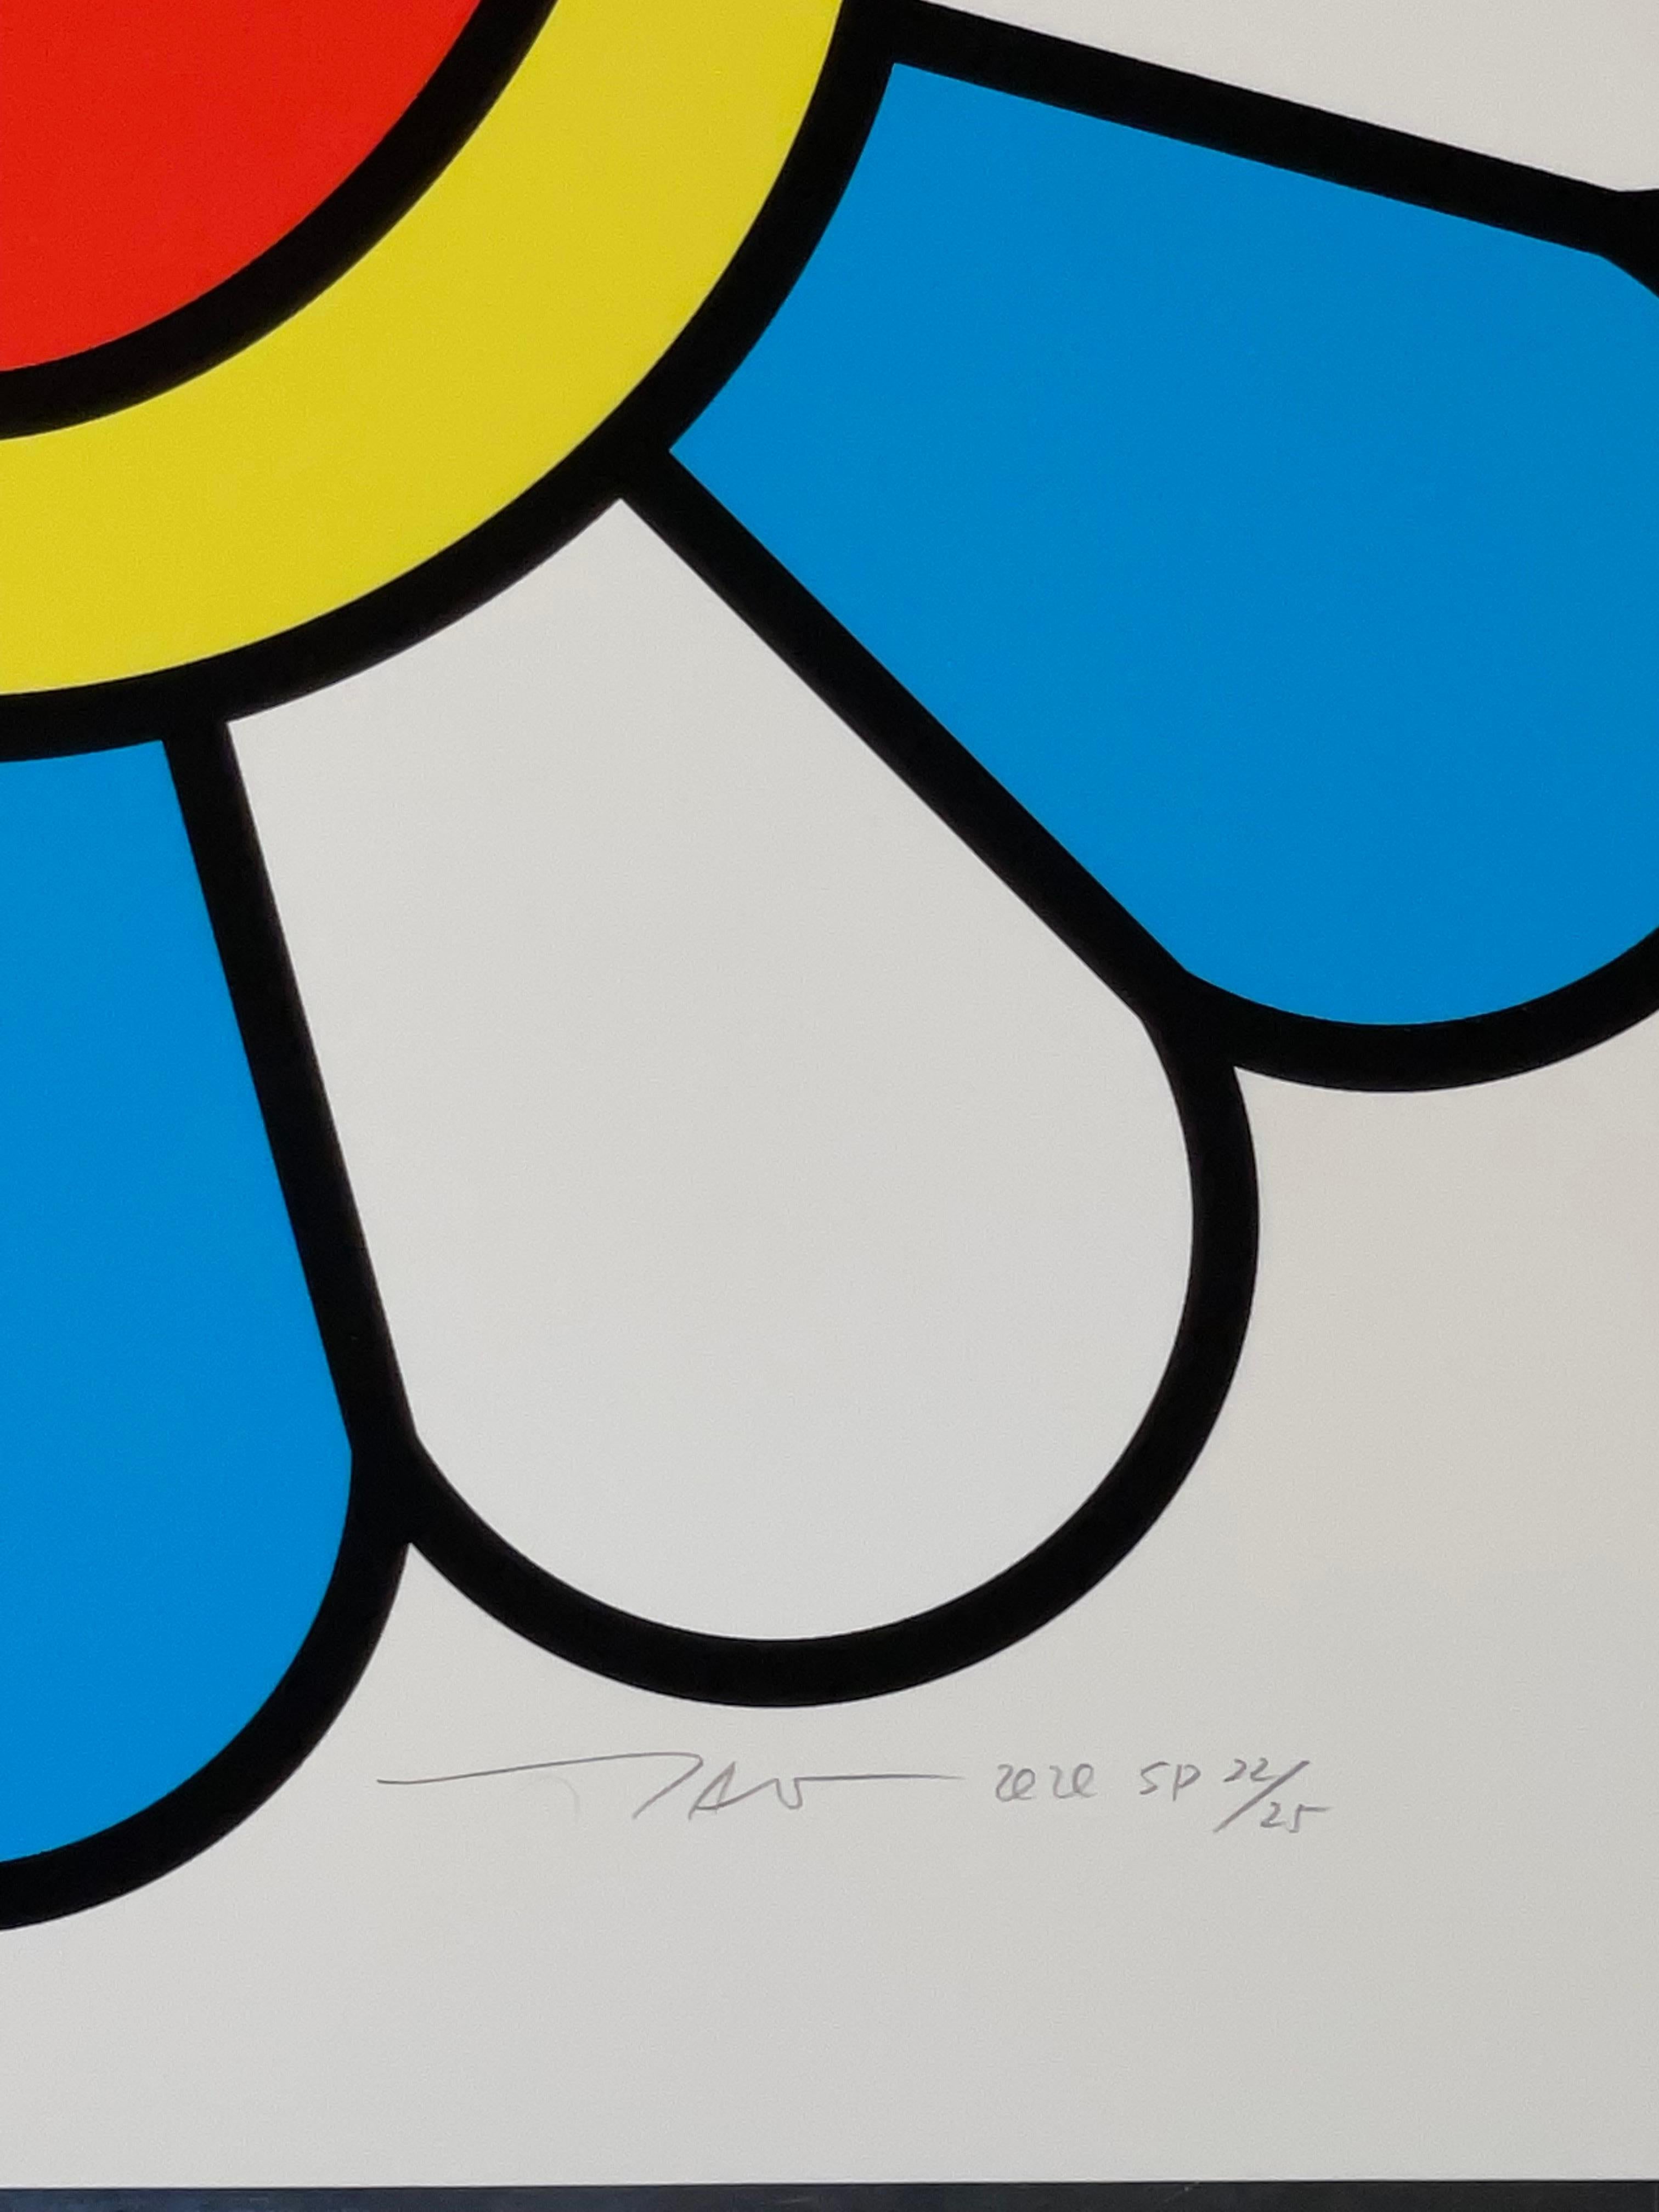 One of the most acclaimed artists to emerge from post-war Asia, Takashi Murakami is known for his signature “Superflat” aesthetic: a colorful, two-dimensional style that straddles the division between fine art and pop culture as it unites elements